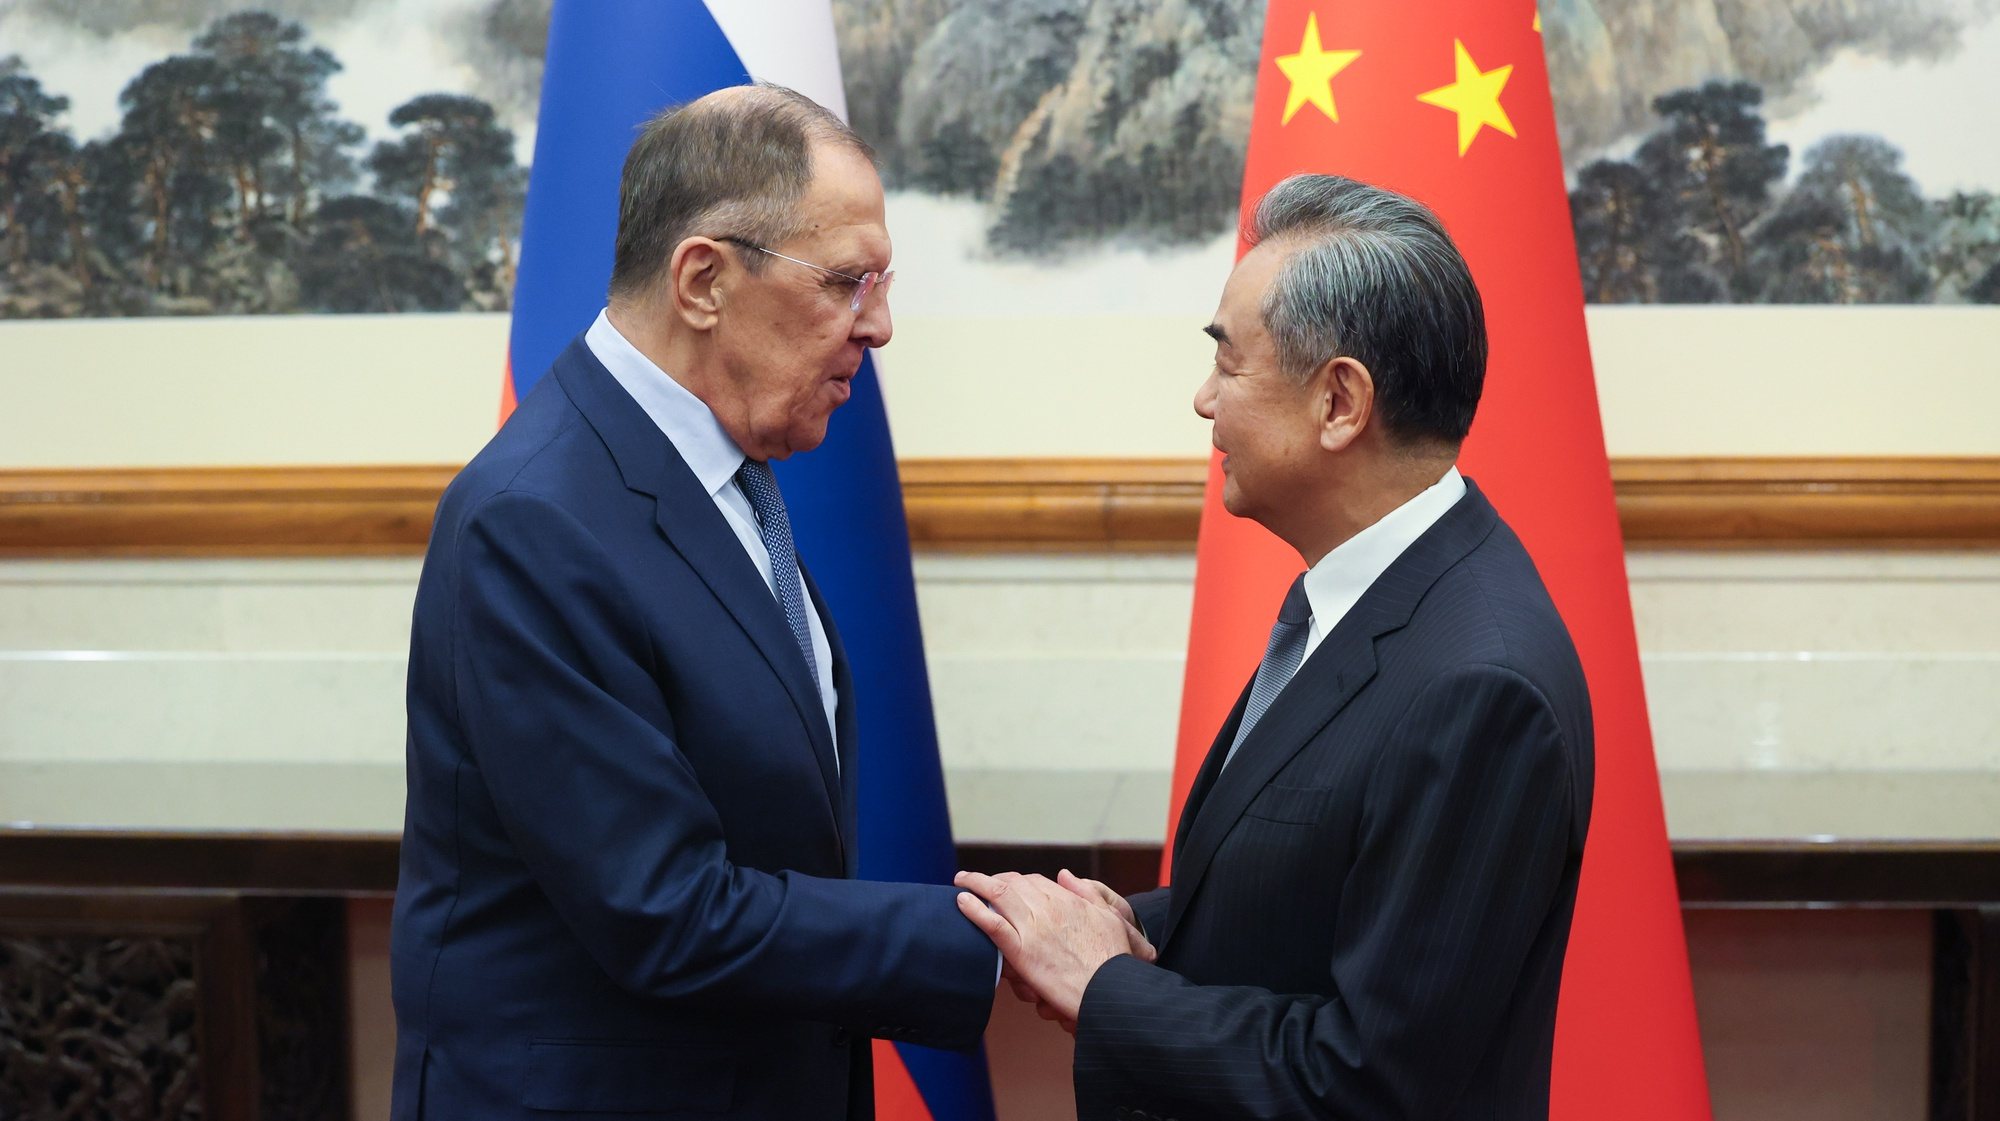 epa10921473 A handout photo made available by the Russian Foreign ministry press service shows Russian Foreign Minister, Sergei Lavrov (L), shaking hands with China&#039;s Foreign Minister, Wang Yi, during their meeting in Beijing, China, 16 October 2023. The Russian president will attend the Third Belt and Road Forum for International Cooperation, which will be held in Beijing on 17-18 October. As part of this trip, he plans to hold talks with the Chinese president.  EPA/RUSSIAN FOREIGN MINISTRY PRESS SERVICE / HANDOUT   HANDOUT EDITORIAL USE ONLY/NO SALES HANDOUT EDITORIAL USE ONLY/NO SALES